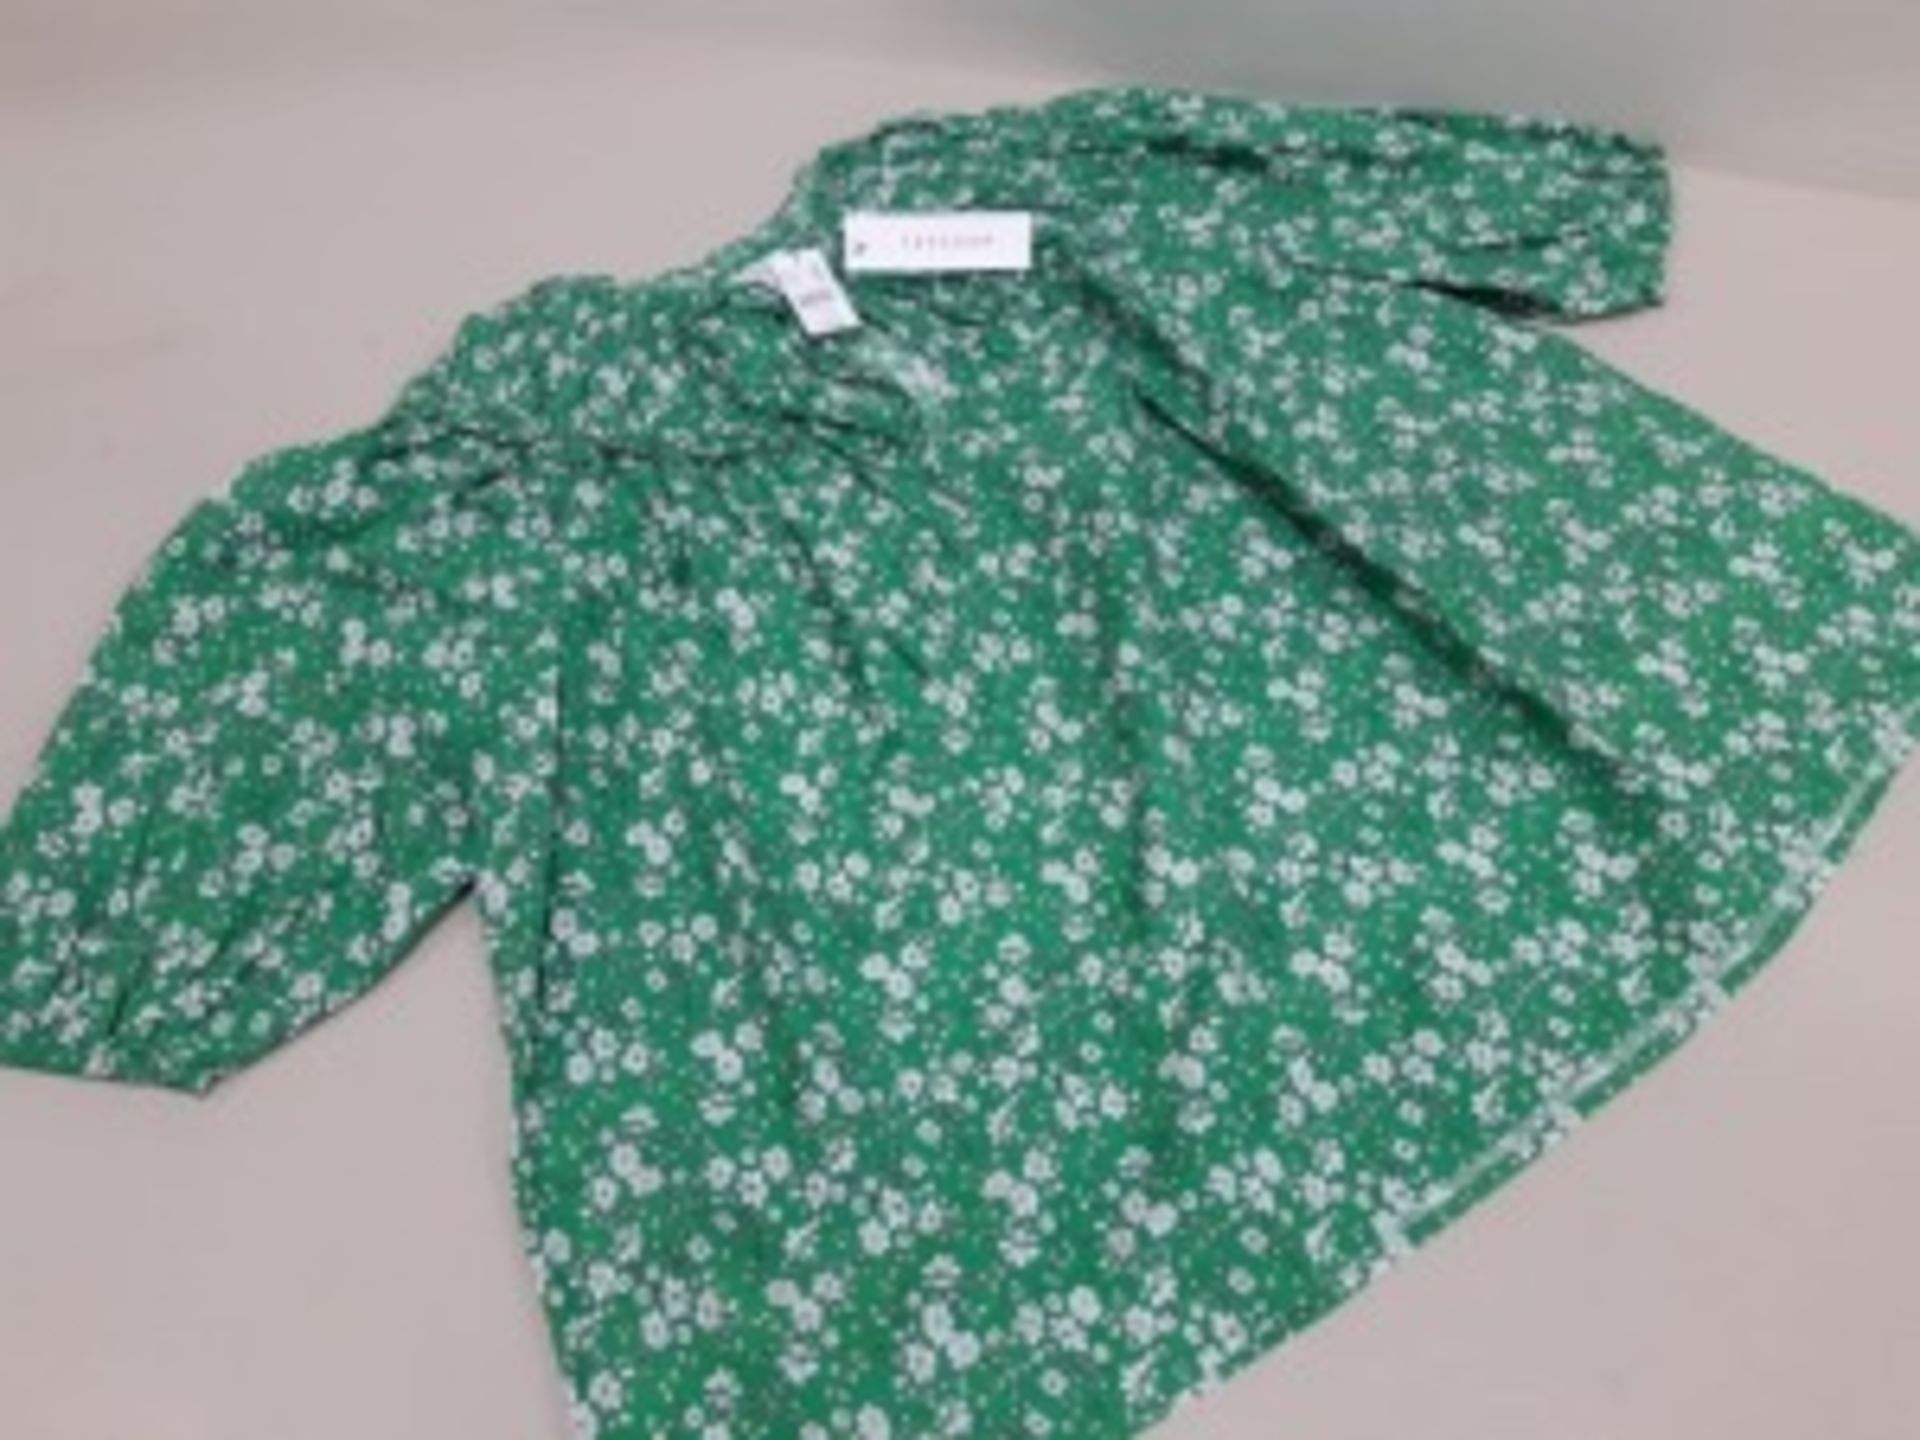 16 X BRAND NEW TOPSHOP GREEN FLORAL PRINT 3/4 SLEEVED TOPS IN SIZE UK 18 - RRP £29.00pp